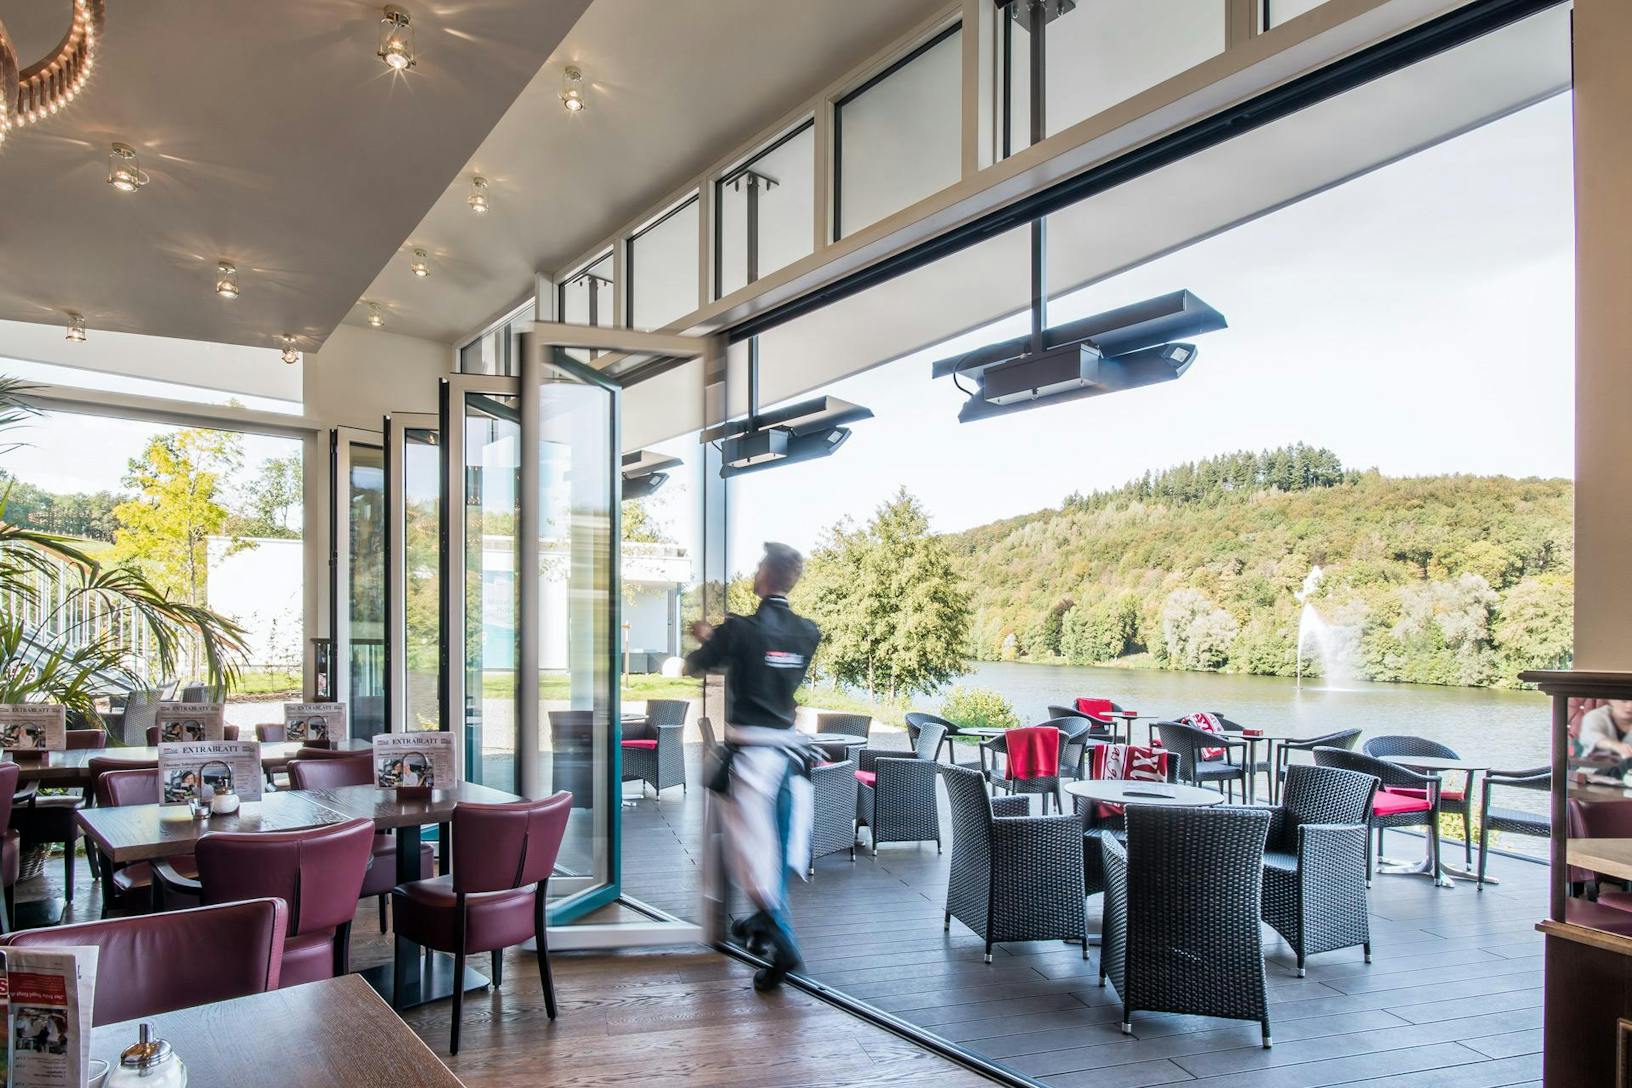 Restaurant with moveable glass walls to eat outdoors - NW Wood 540 Folding